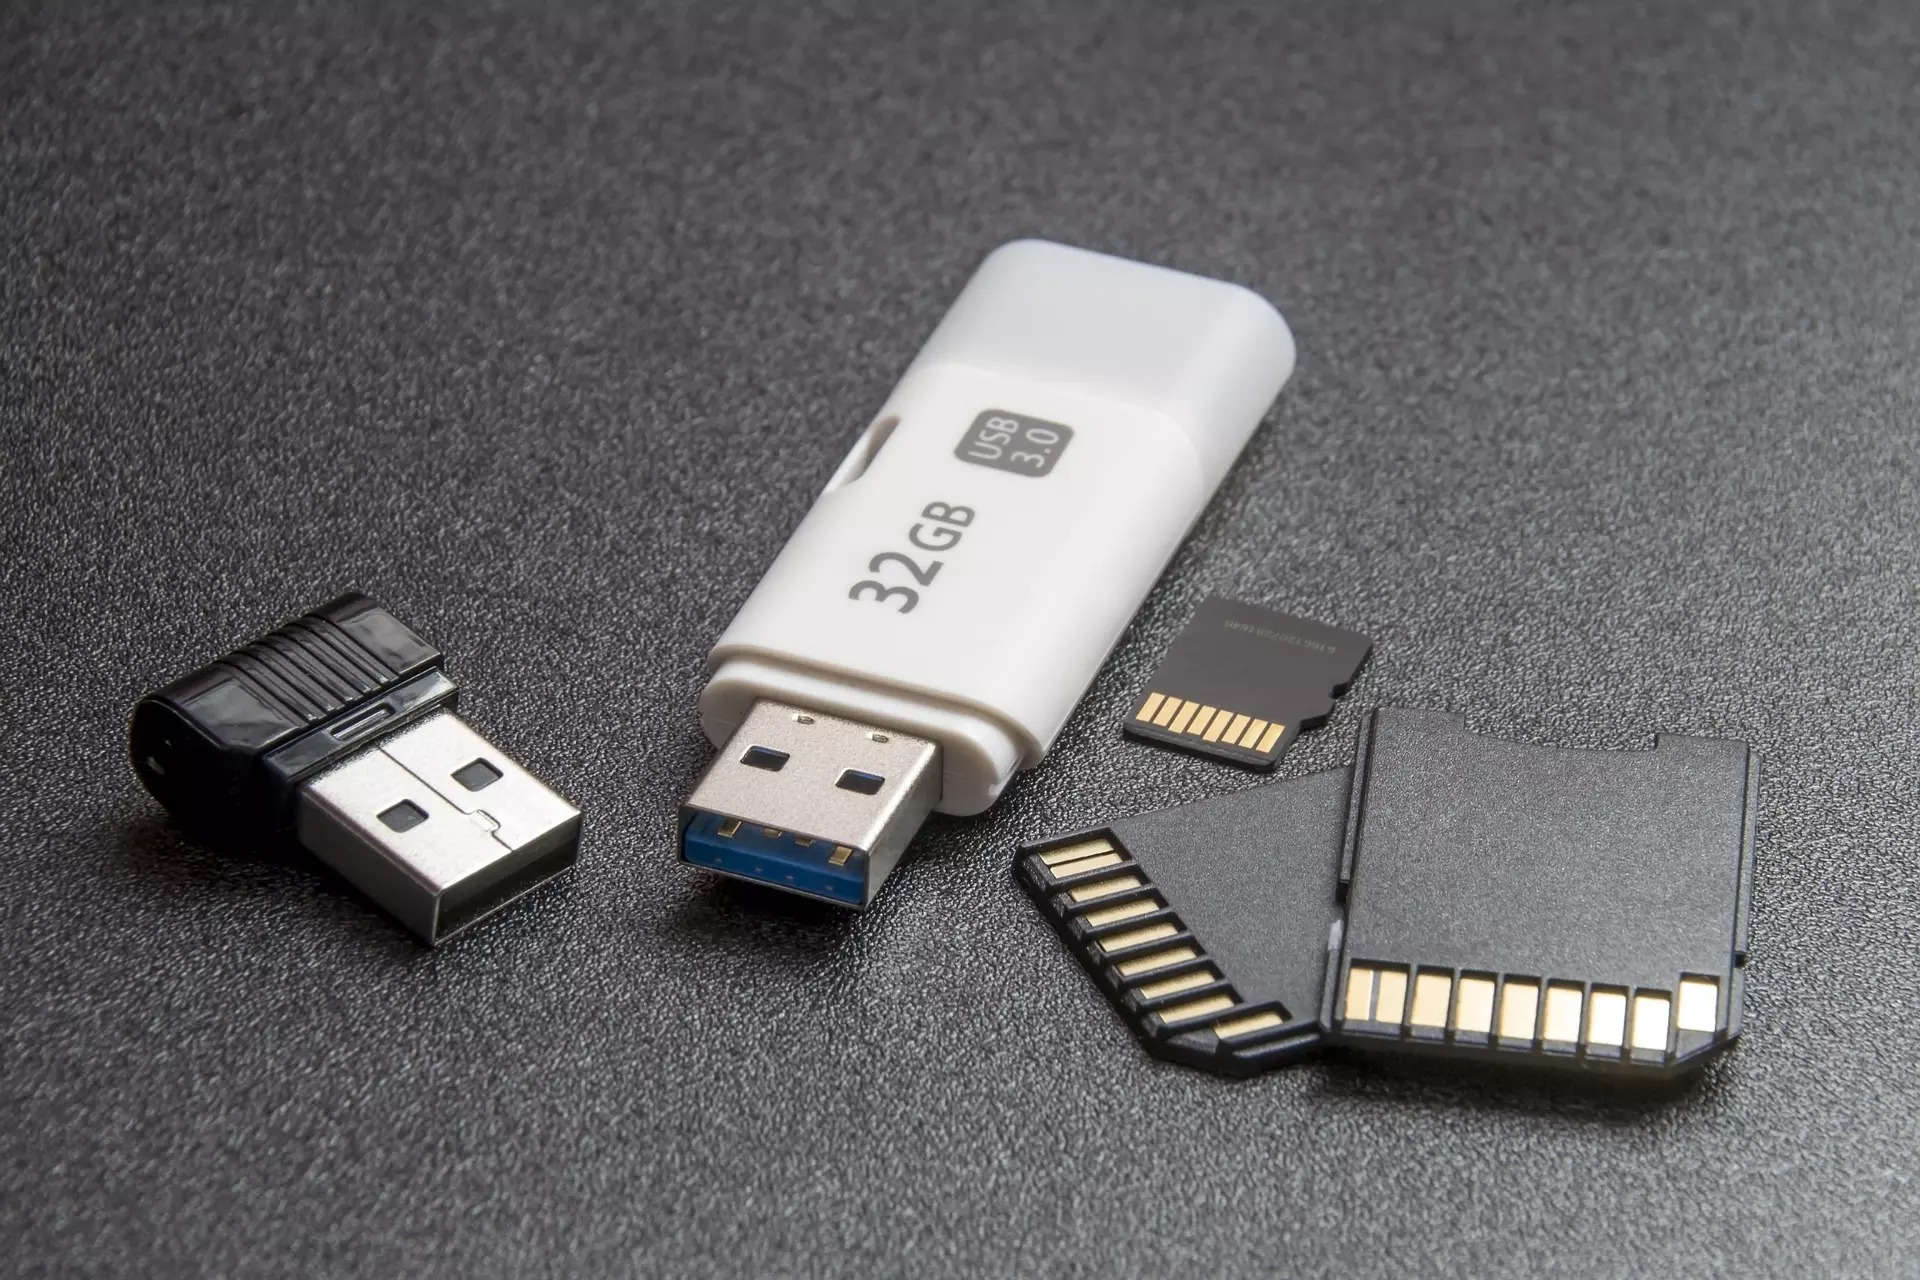 Best USB Type-C pendrives for quick file transfers